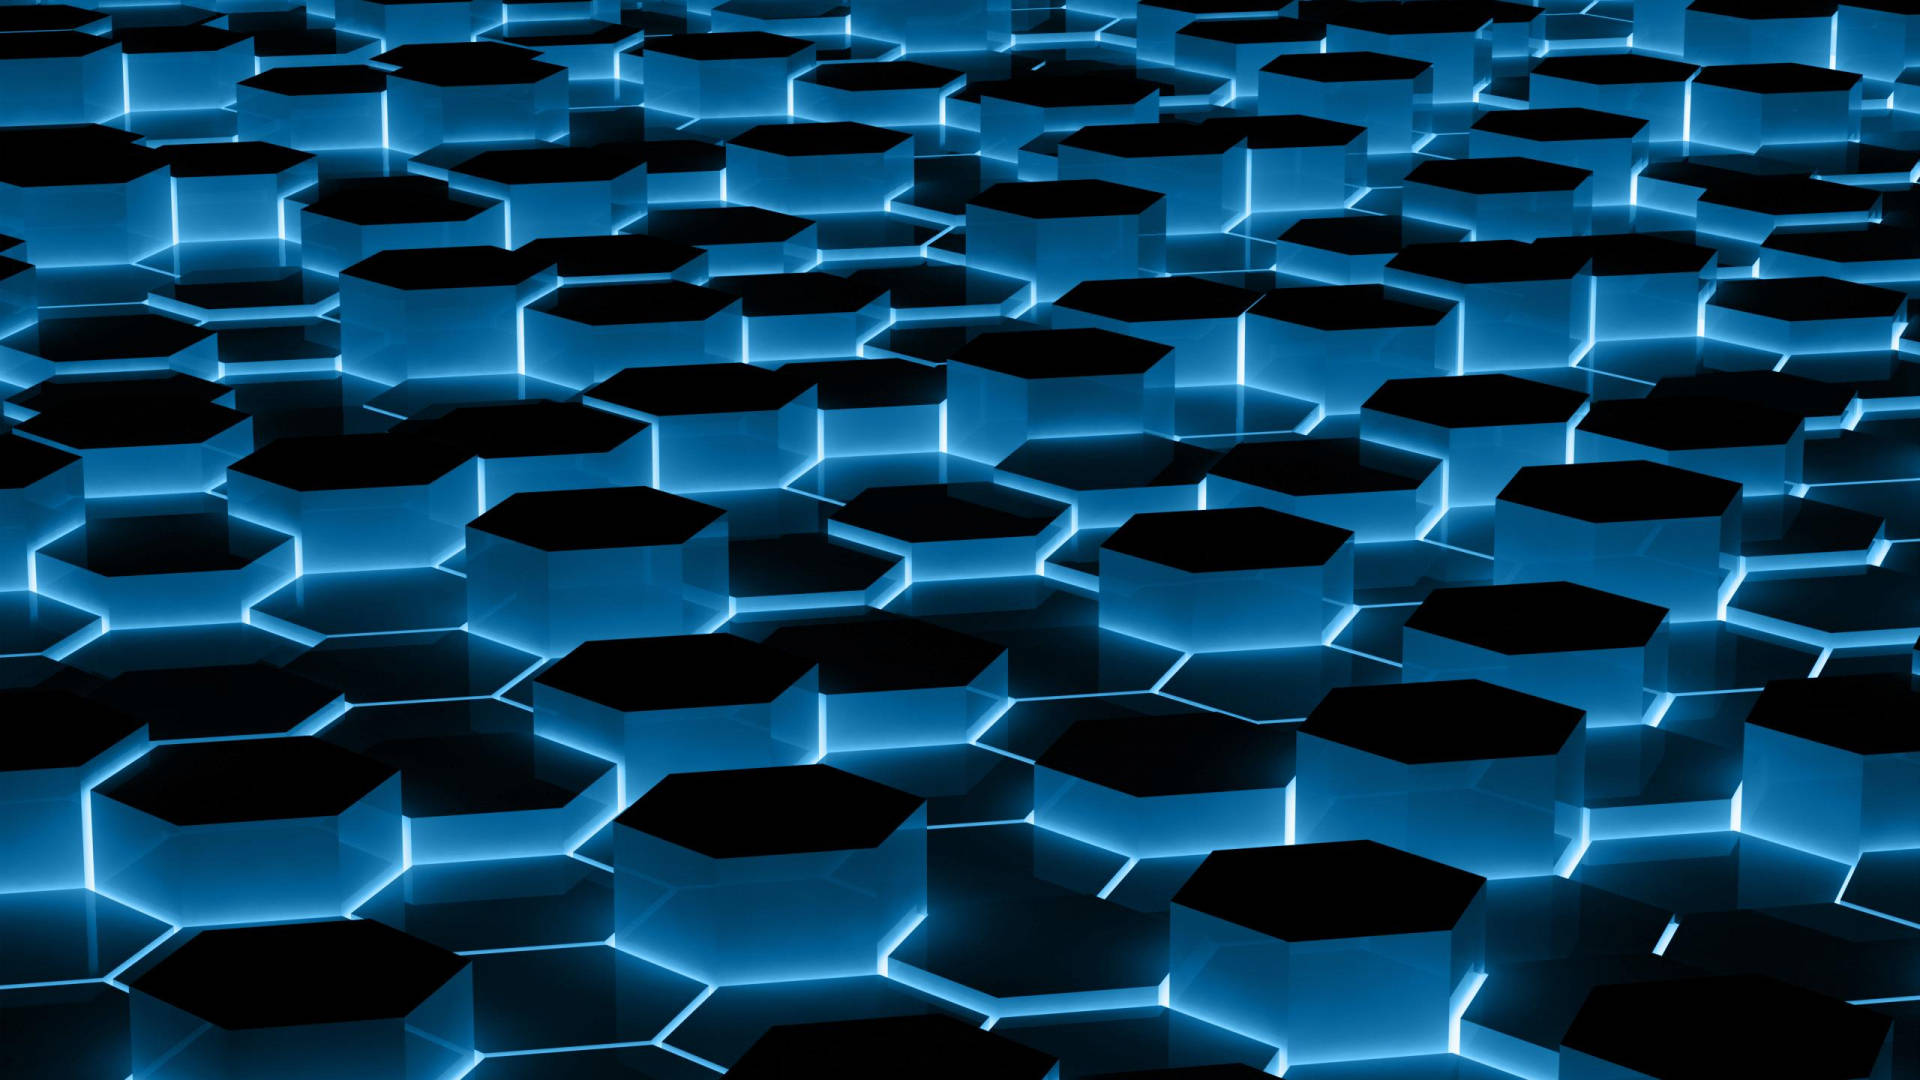 Cool Pictures 3d Hexagon Patterns Background